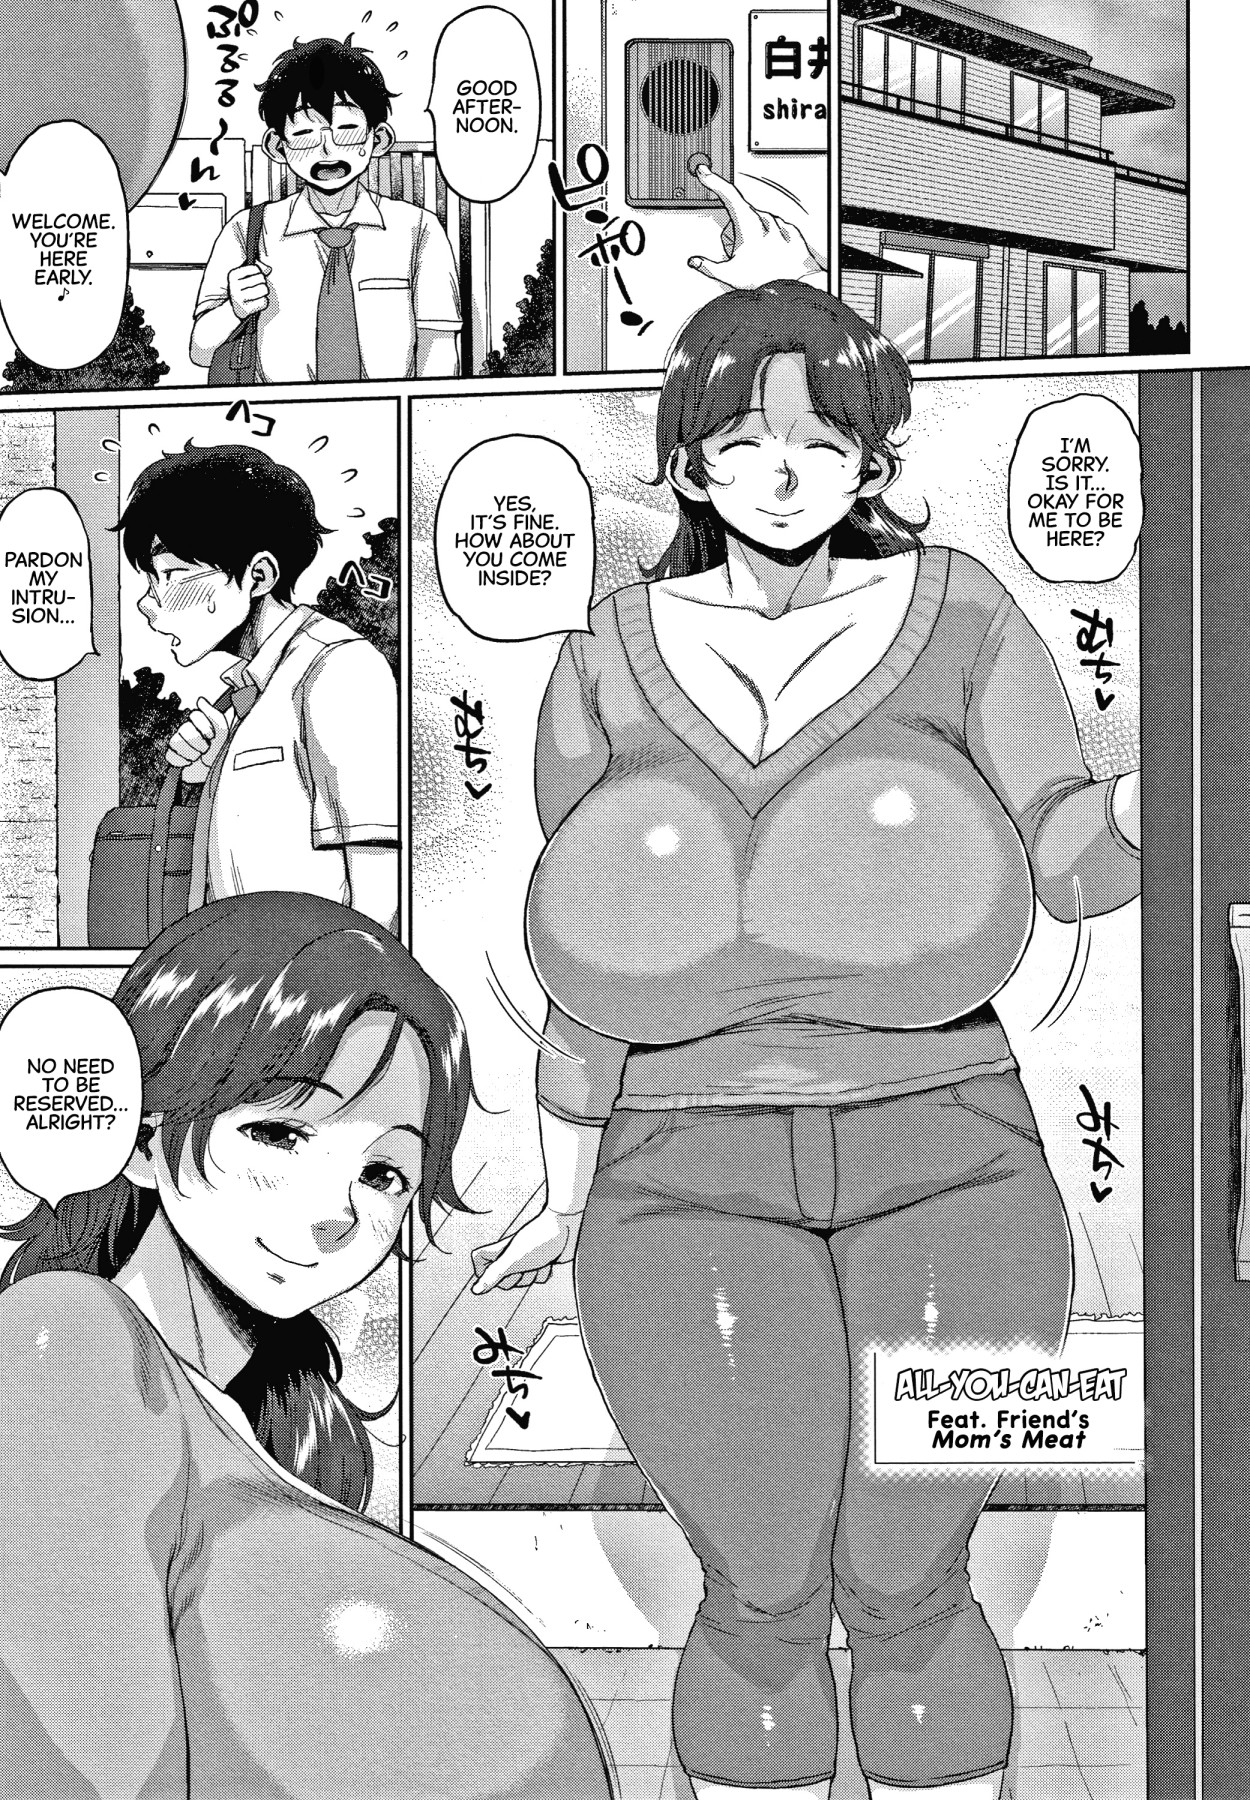 Hentai Manga Comic-All-You-Can-Eat Feat. Friend's Mom's Meat-Read-1